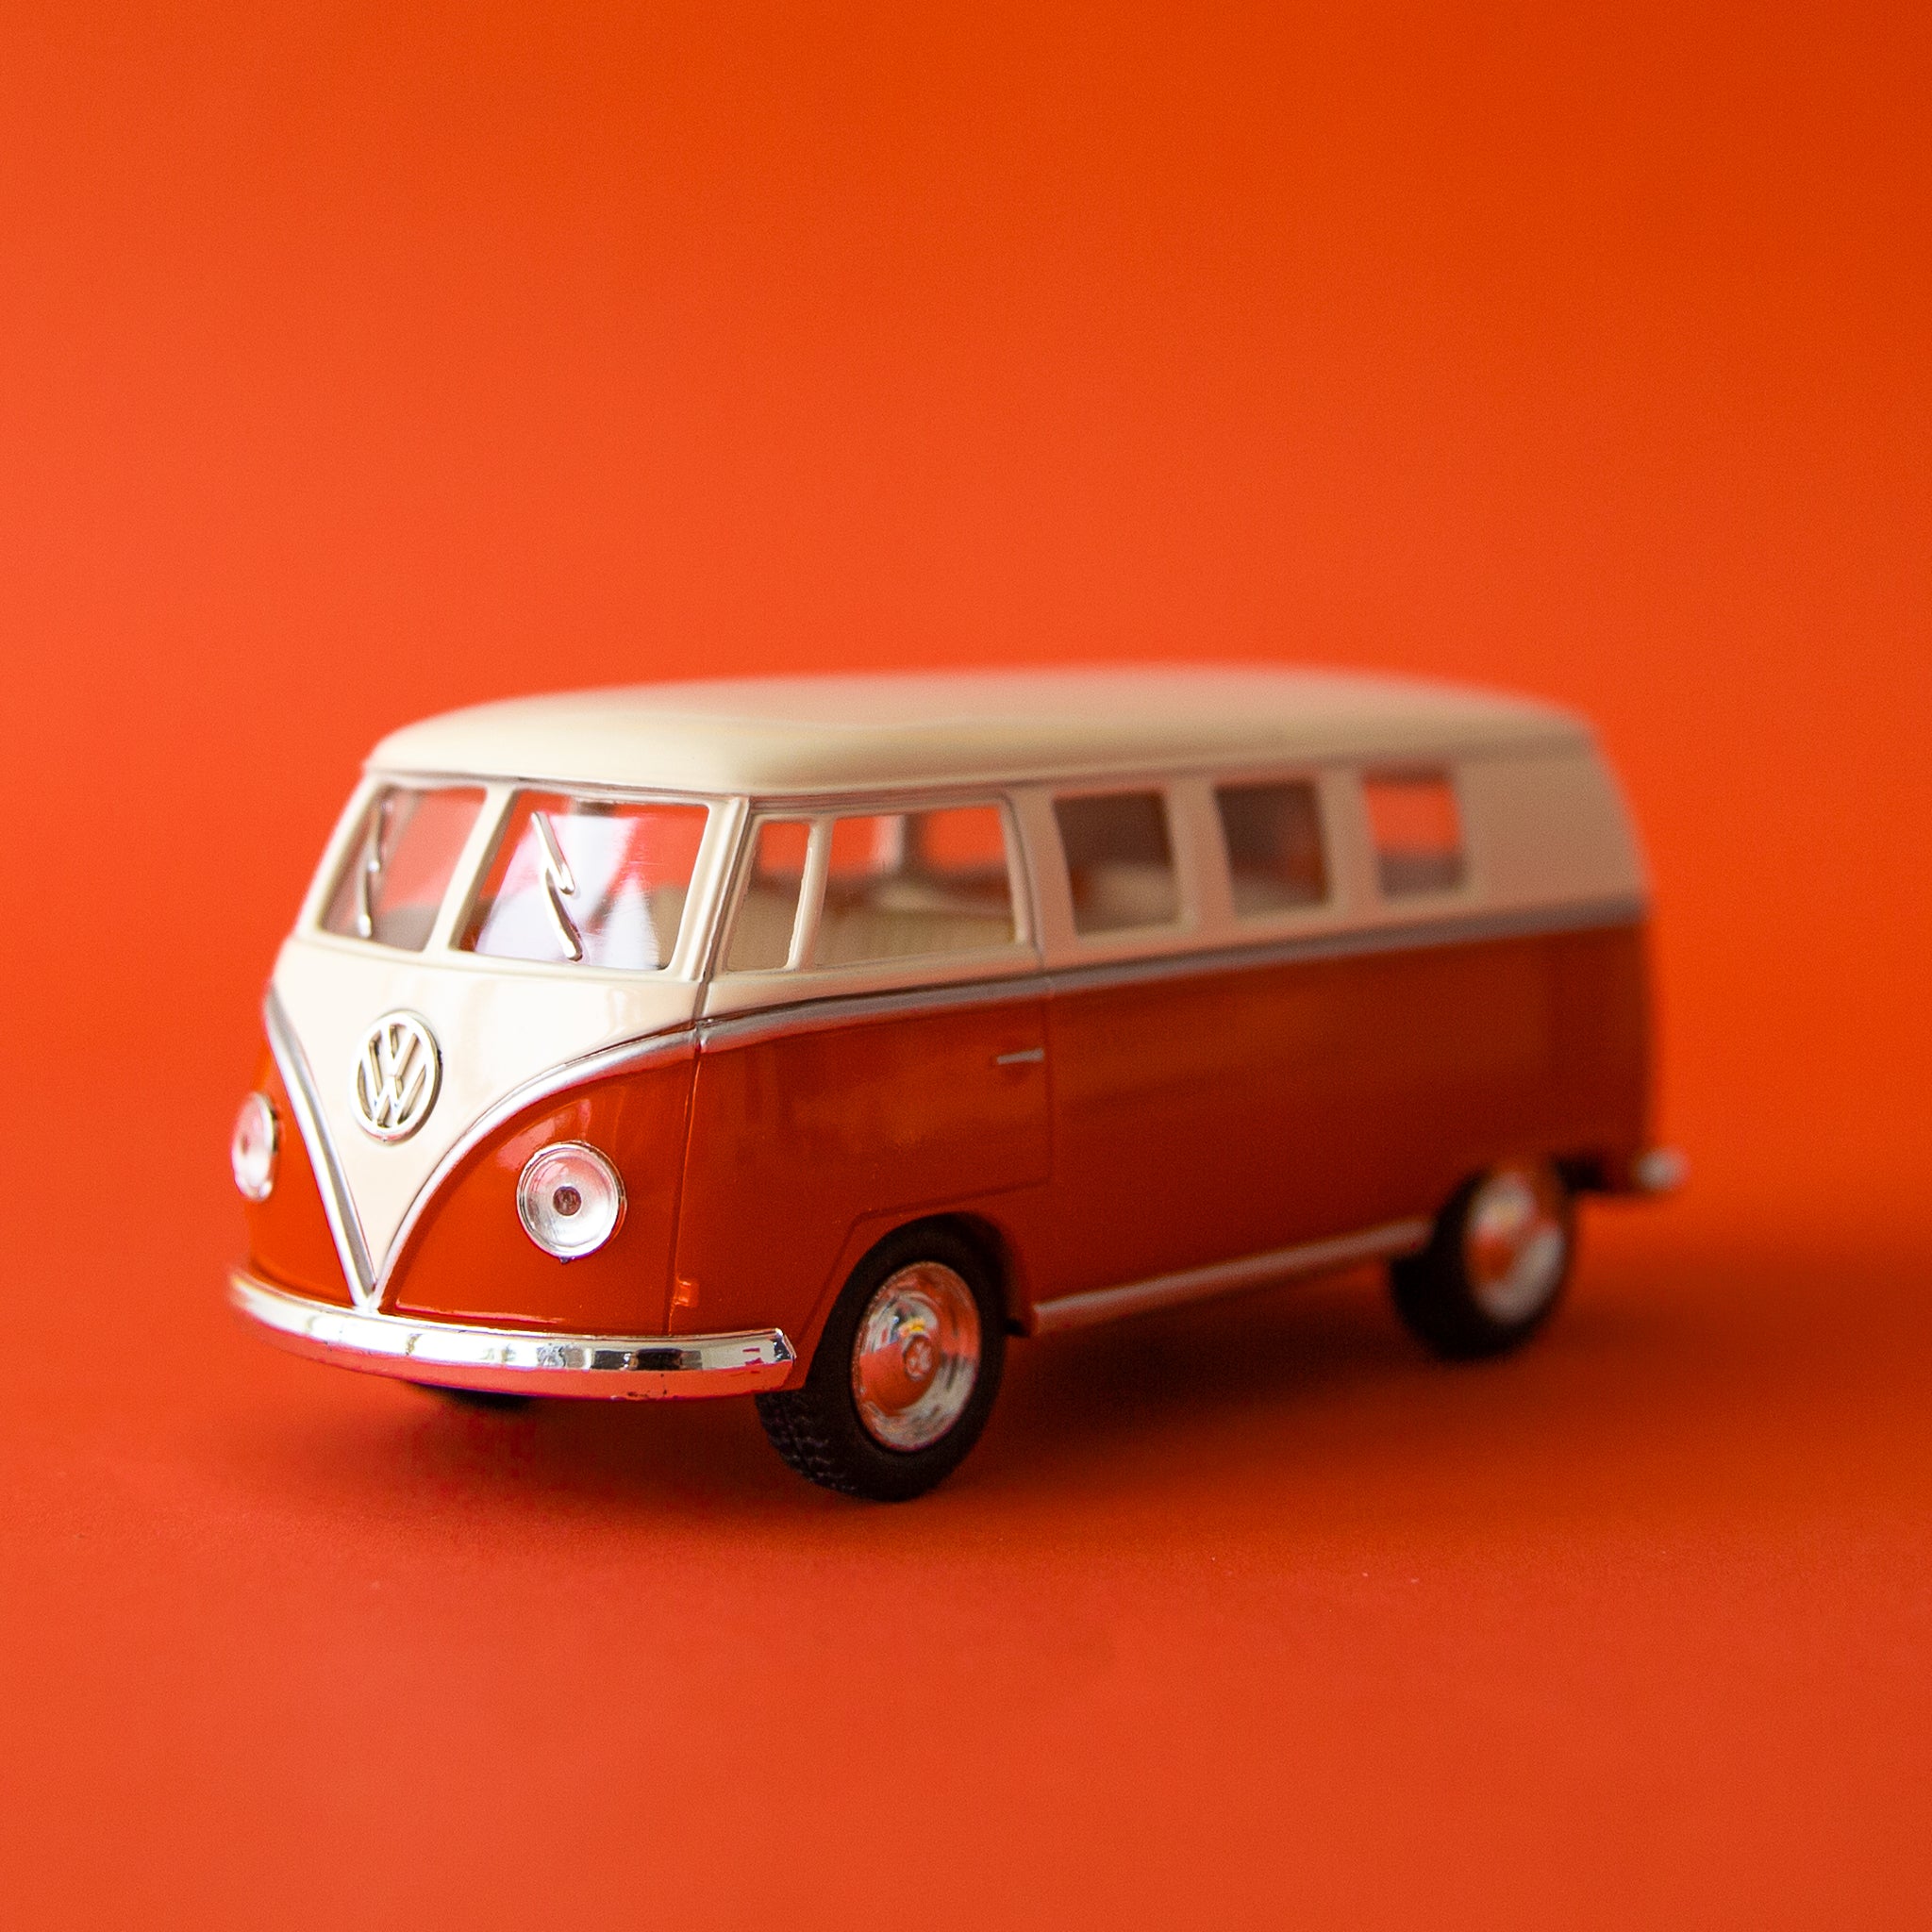 On a red background is a red and white VW bus toy. 